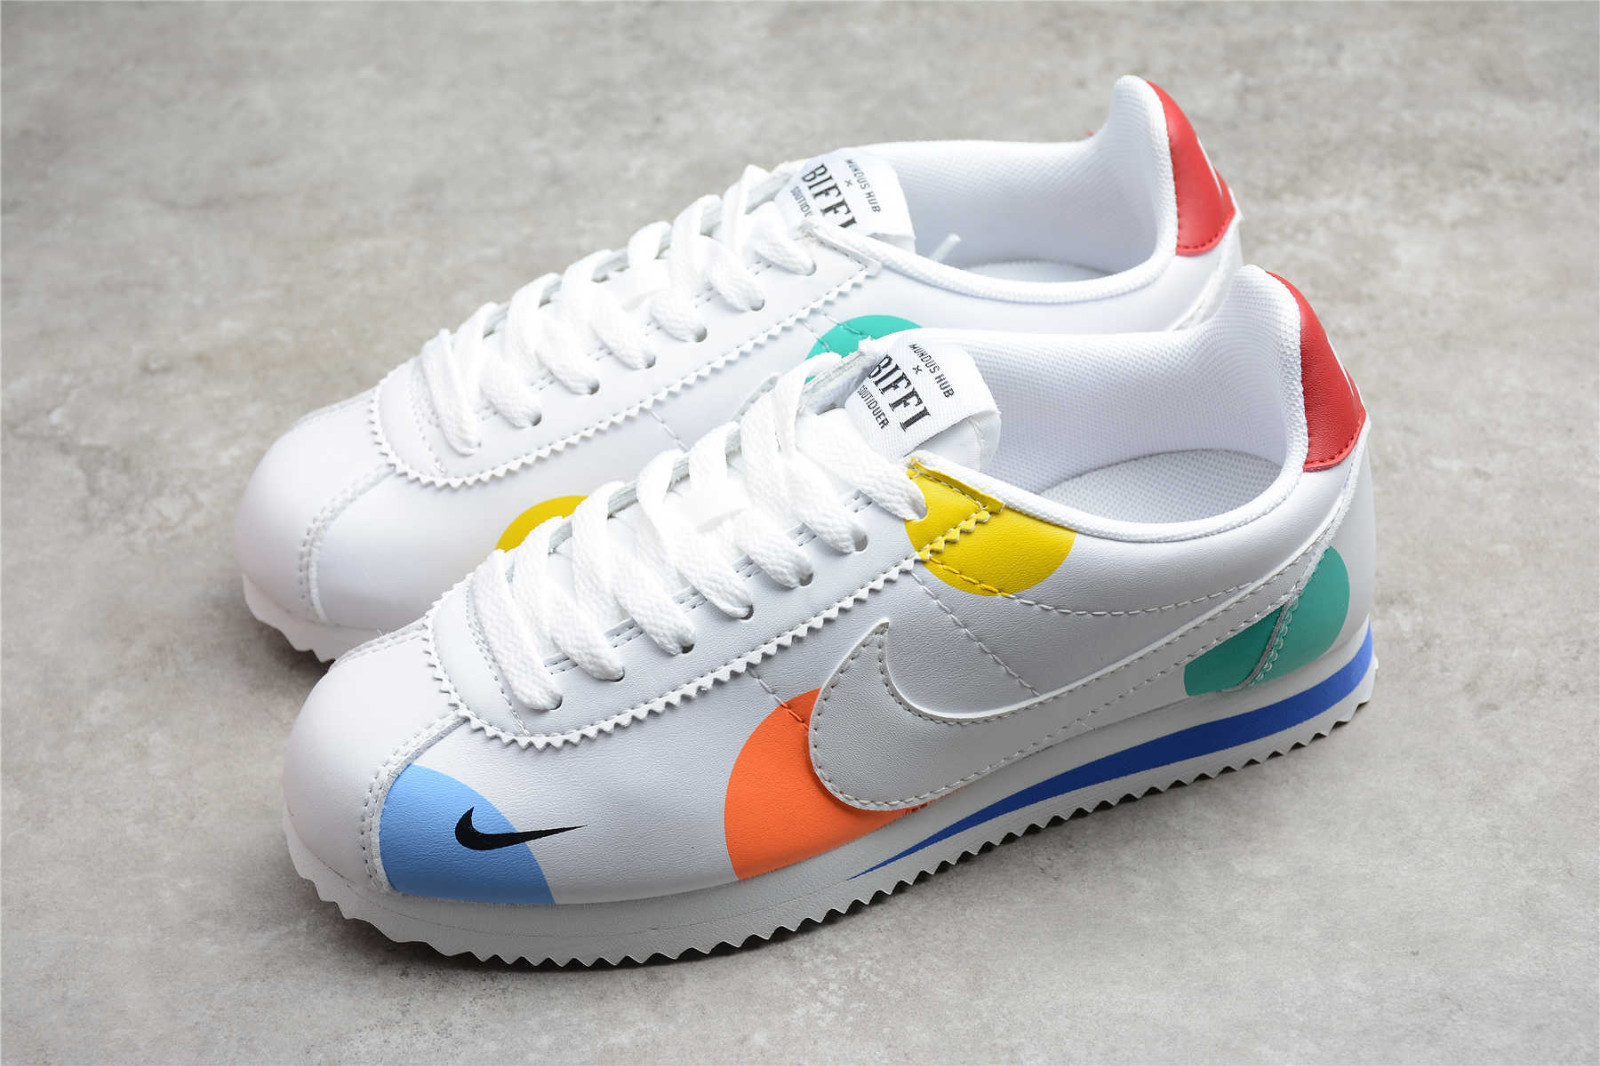 Nike Classic White Varisty Yellow Blue AH7528 - StclaircomoShops - nike air marvin low black red white dress shoes - 005